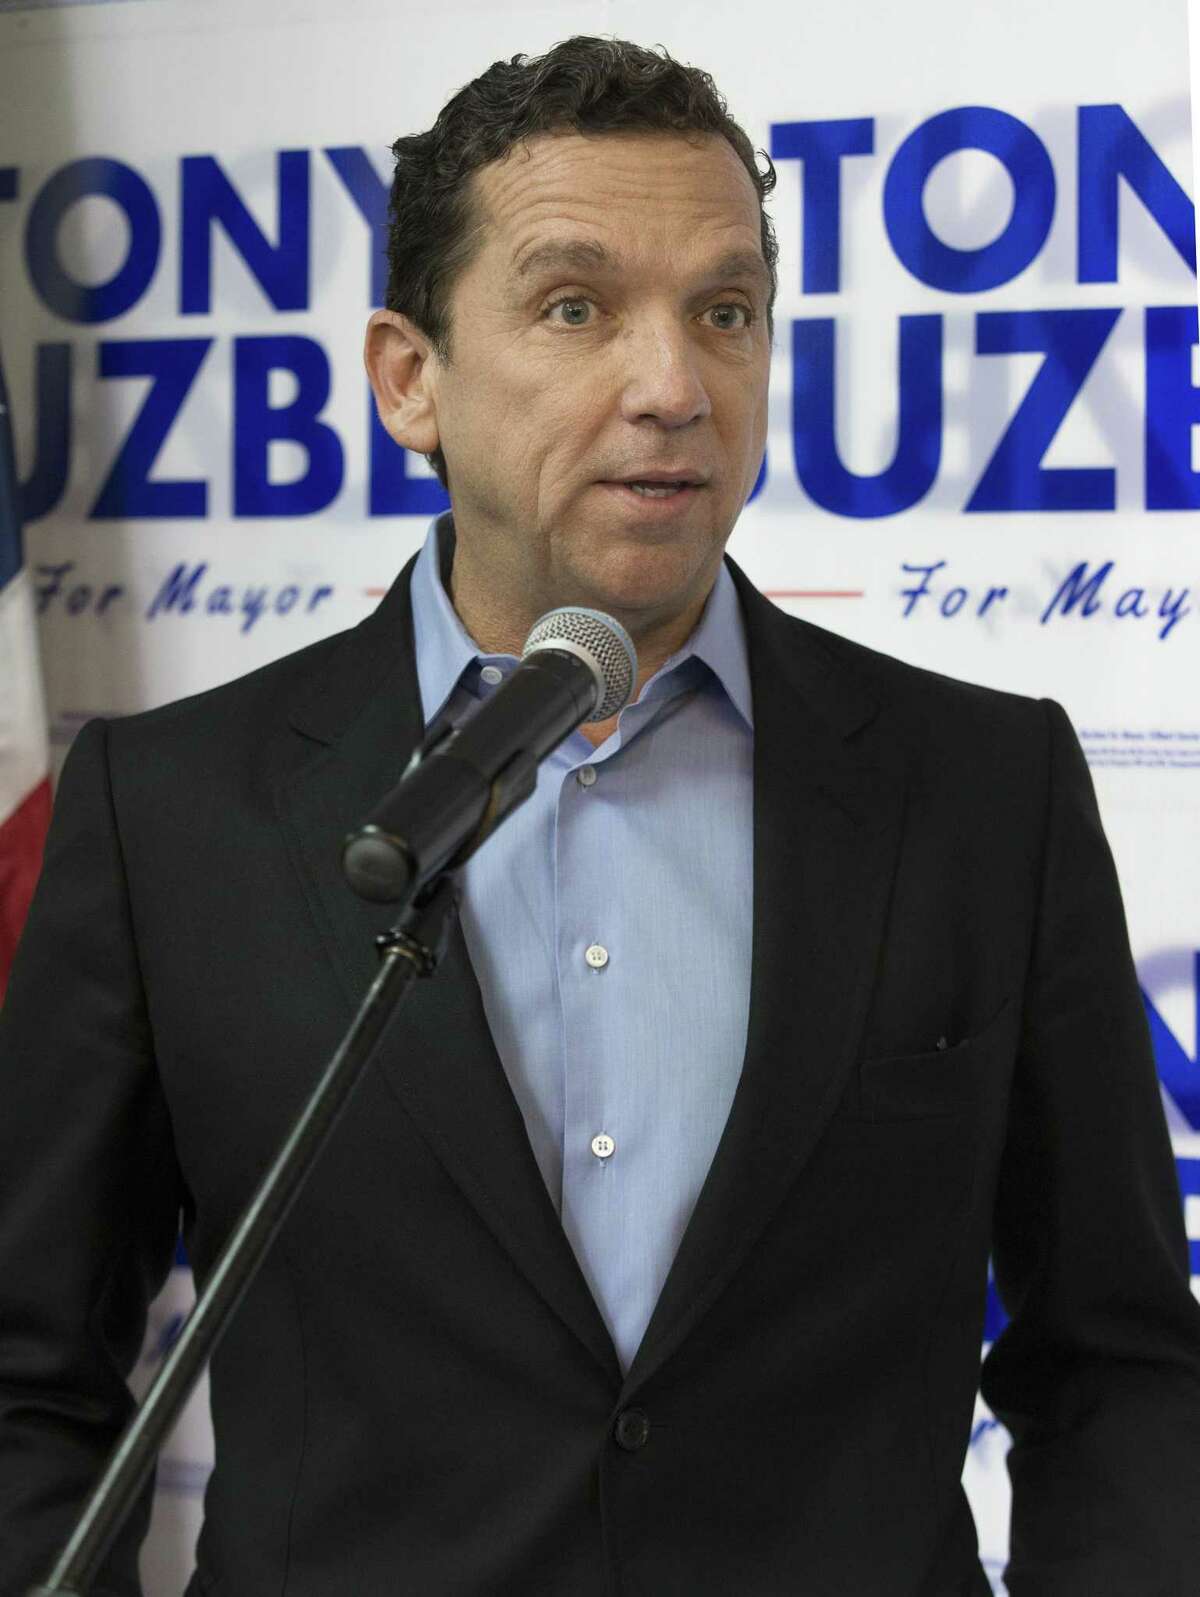 High-profile lawyer Tony Buzbee has also announced his candidacy for Houston mayor.